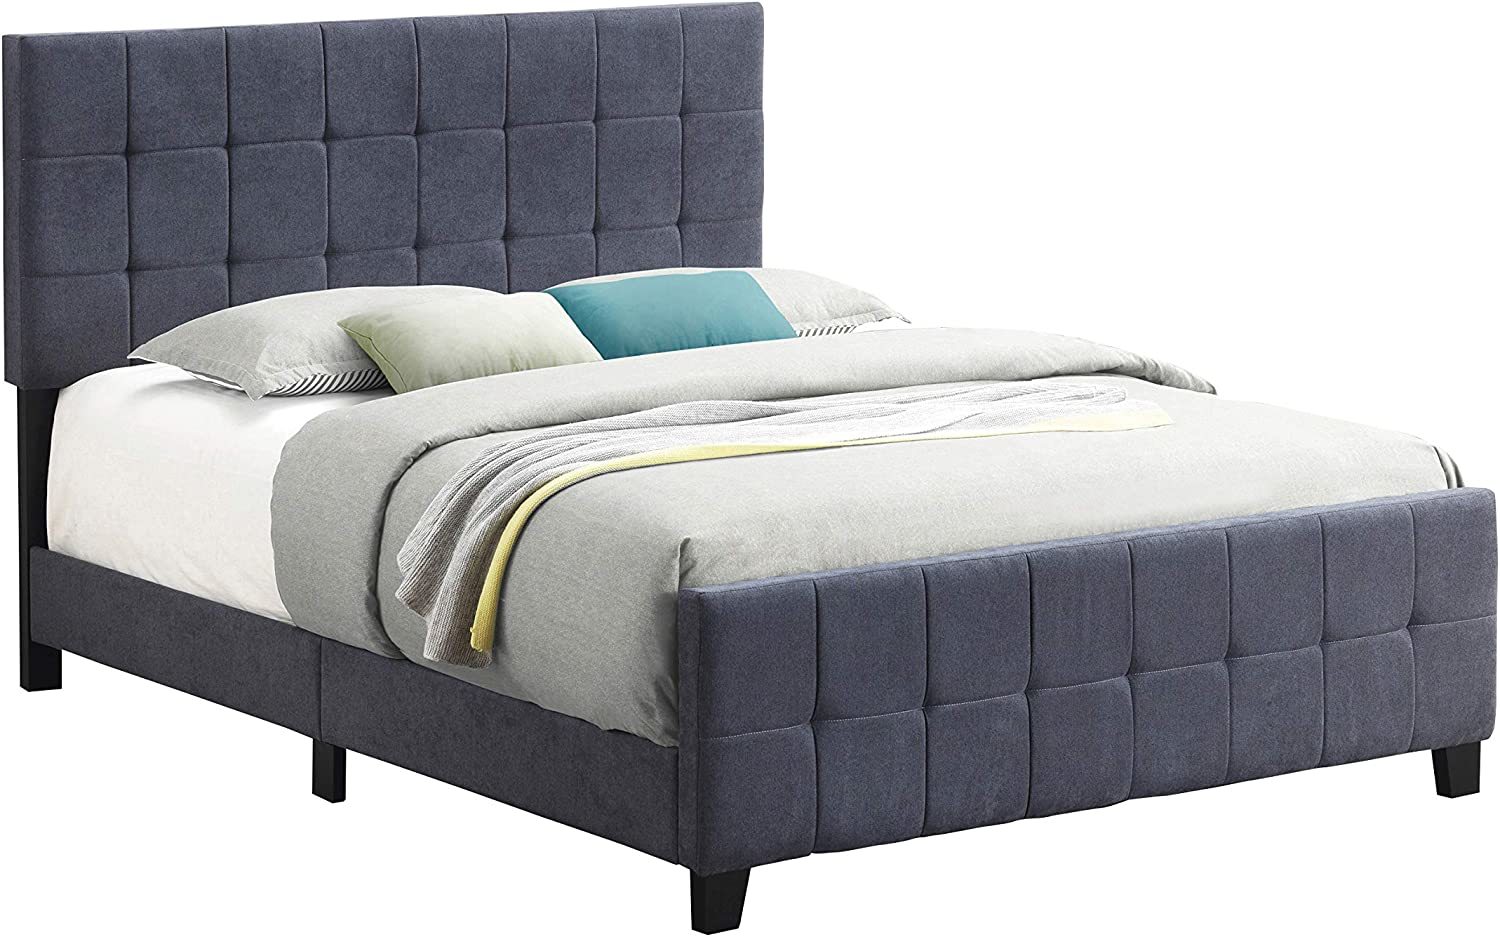 Primary image for Coaster Home Furnishings Fairfield Queen Upholstered Bed Dark Grey Panel